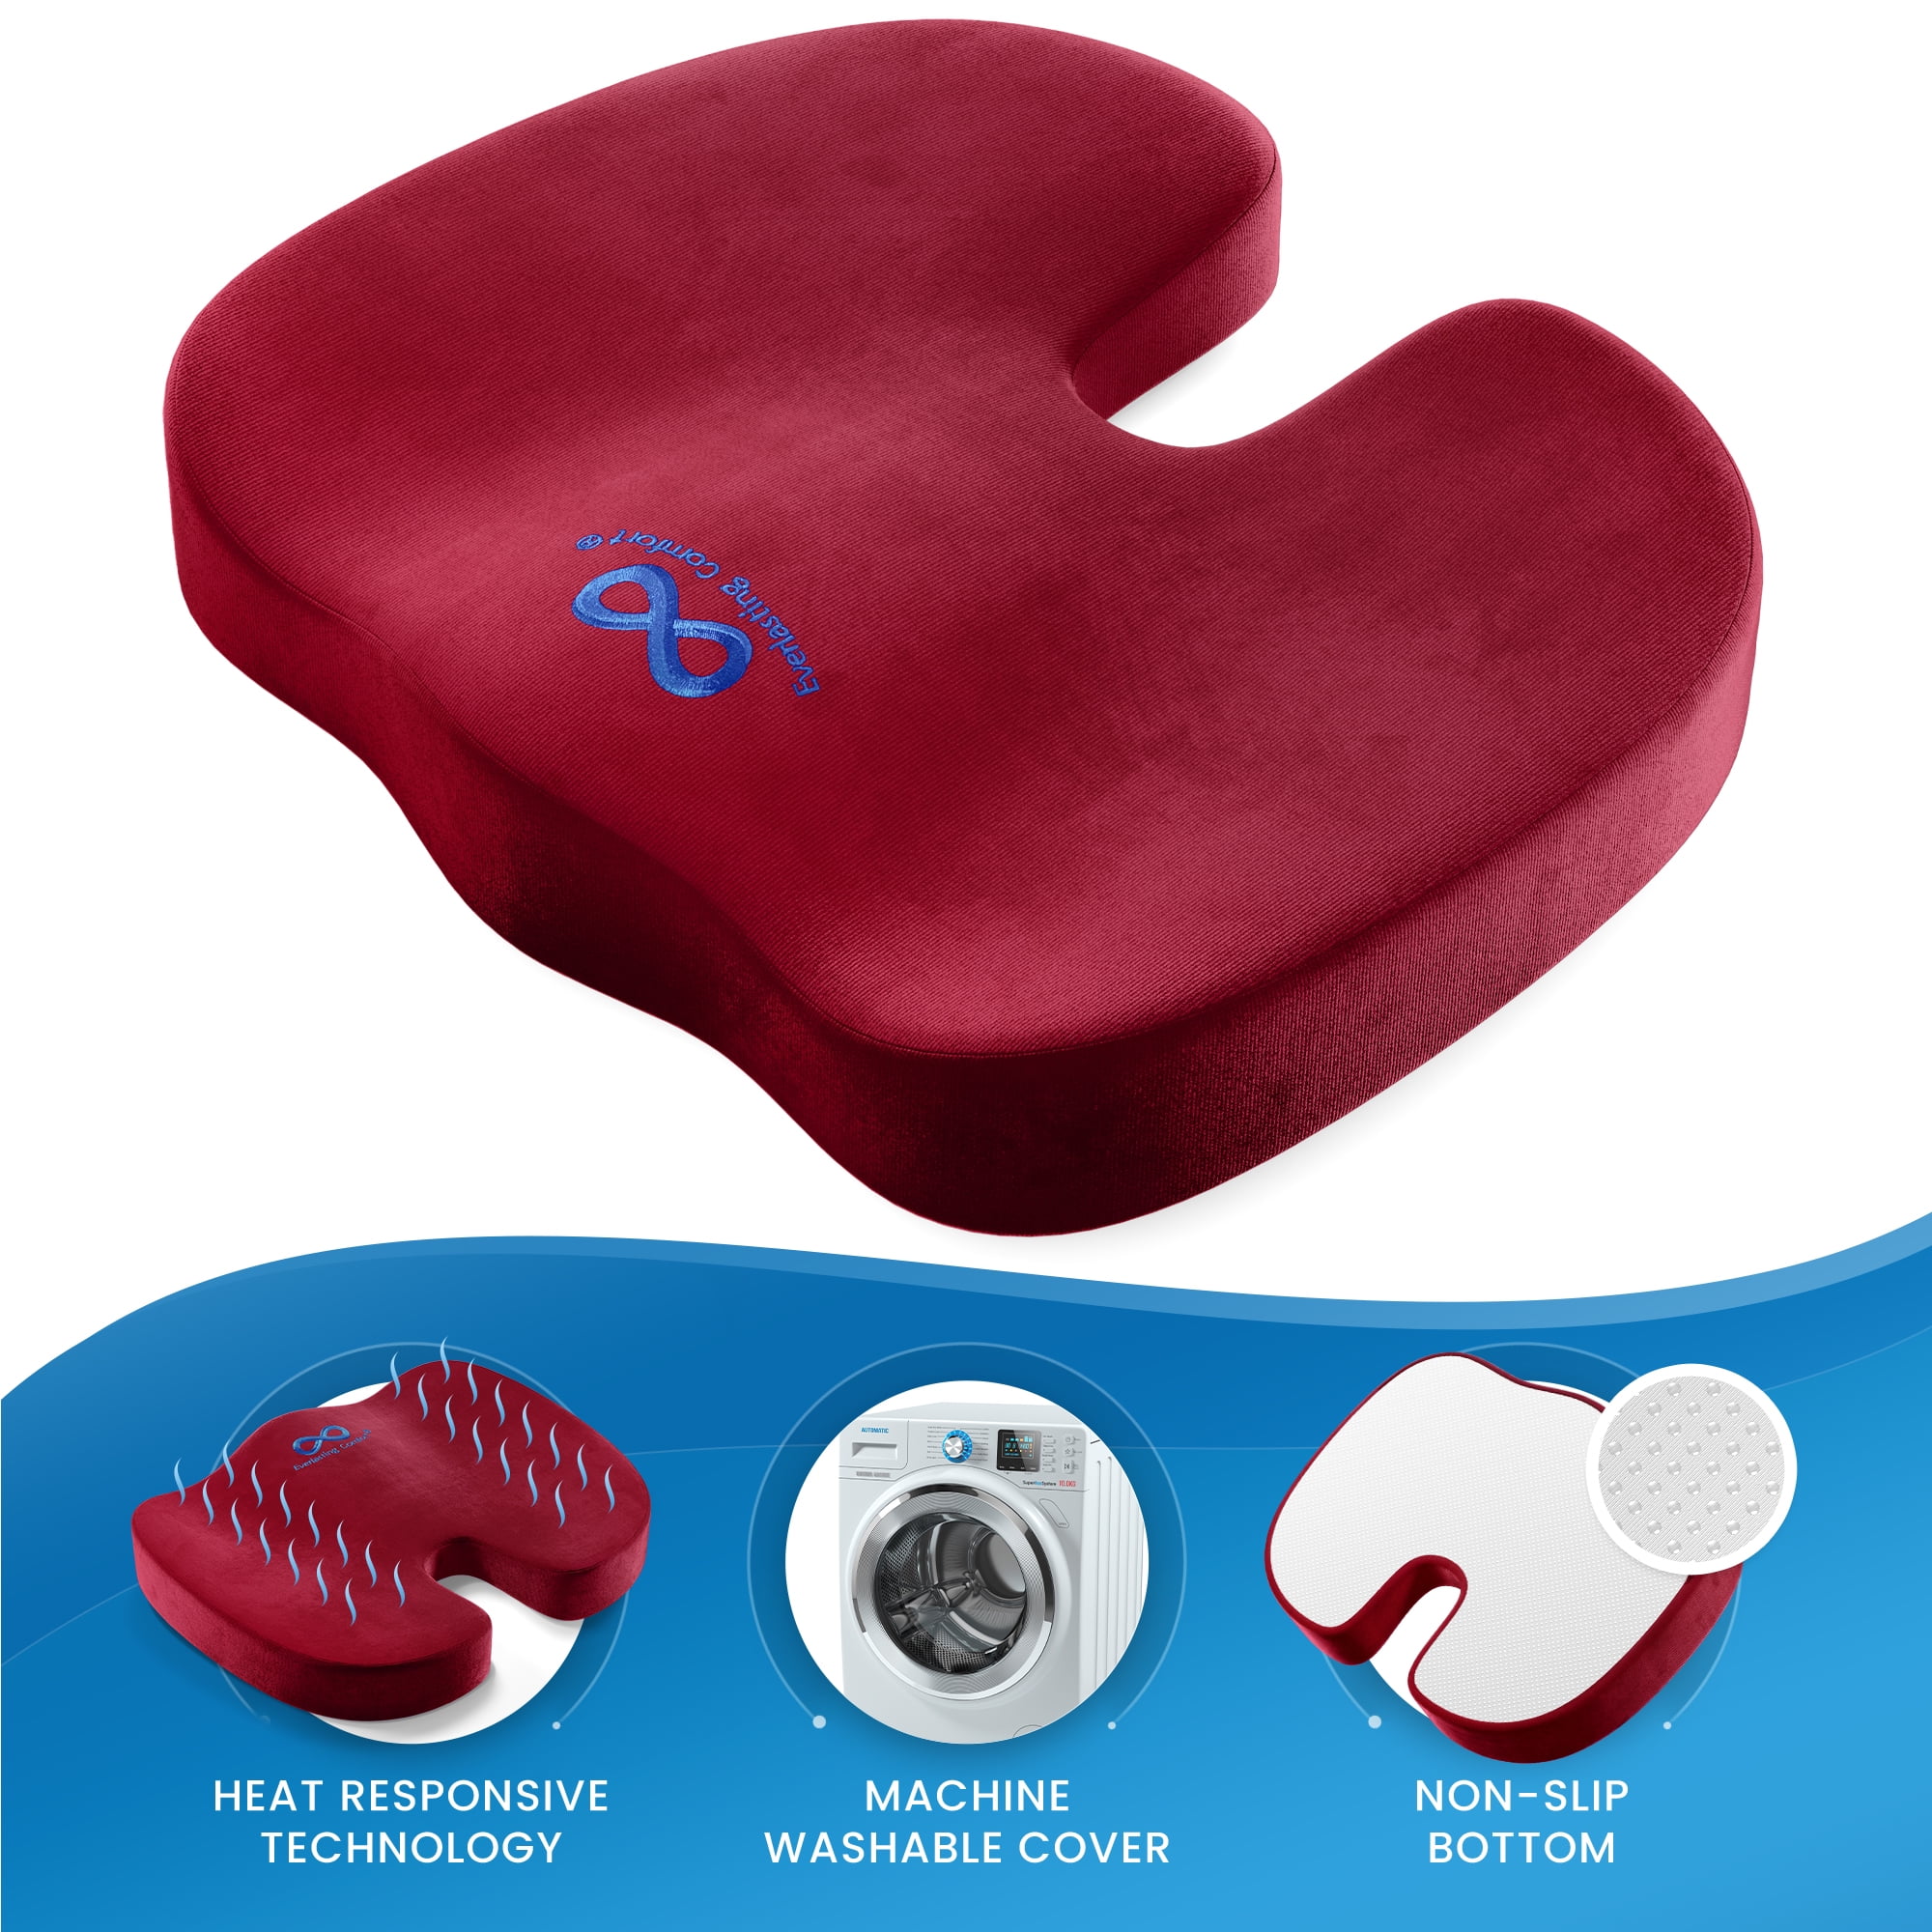 Comfy Pain Relief Orthopedic Seat Cushion - Inspire Uplift